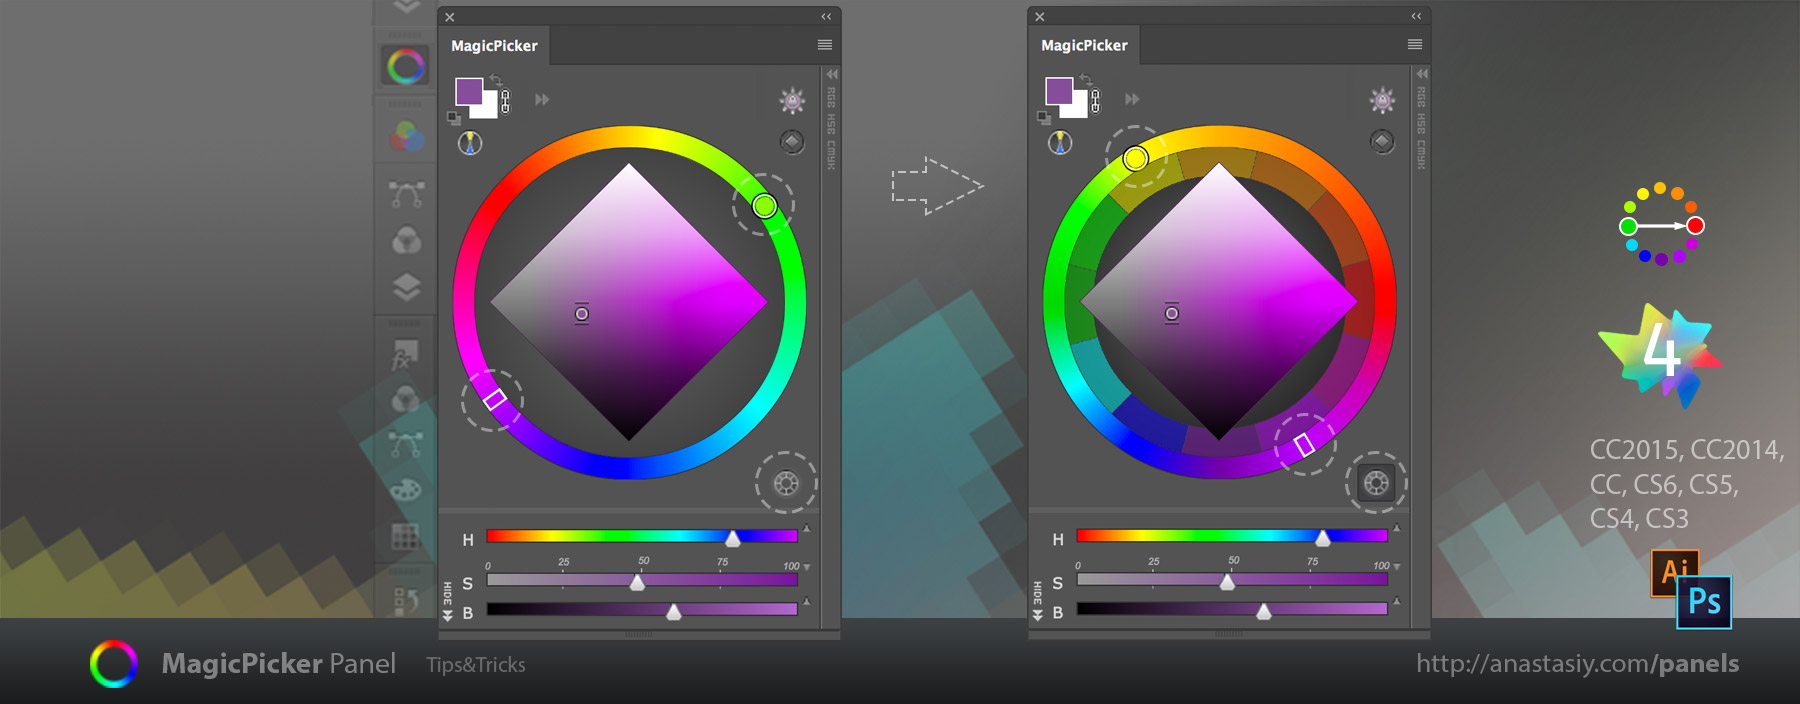 MagicPicker - switch to traditional color wheel